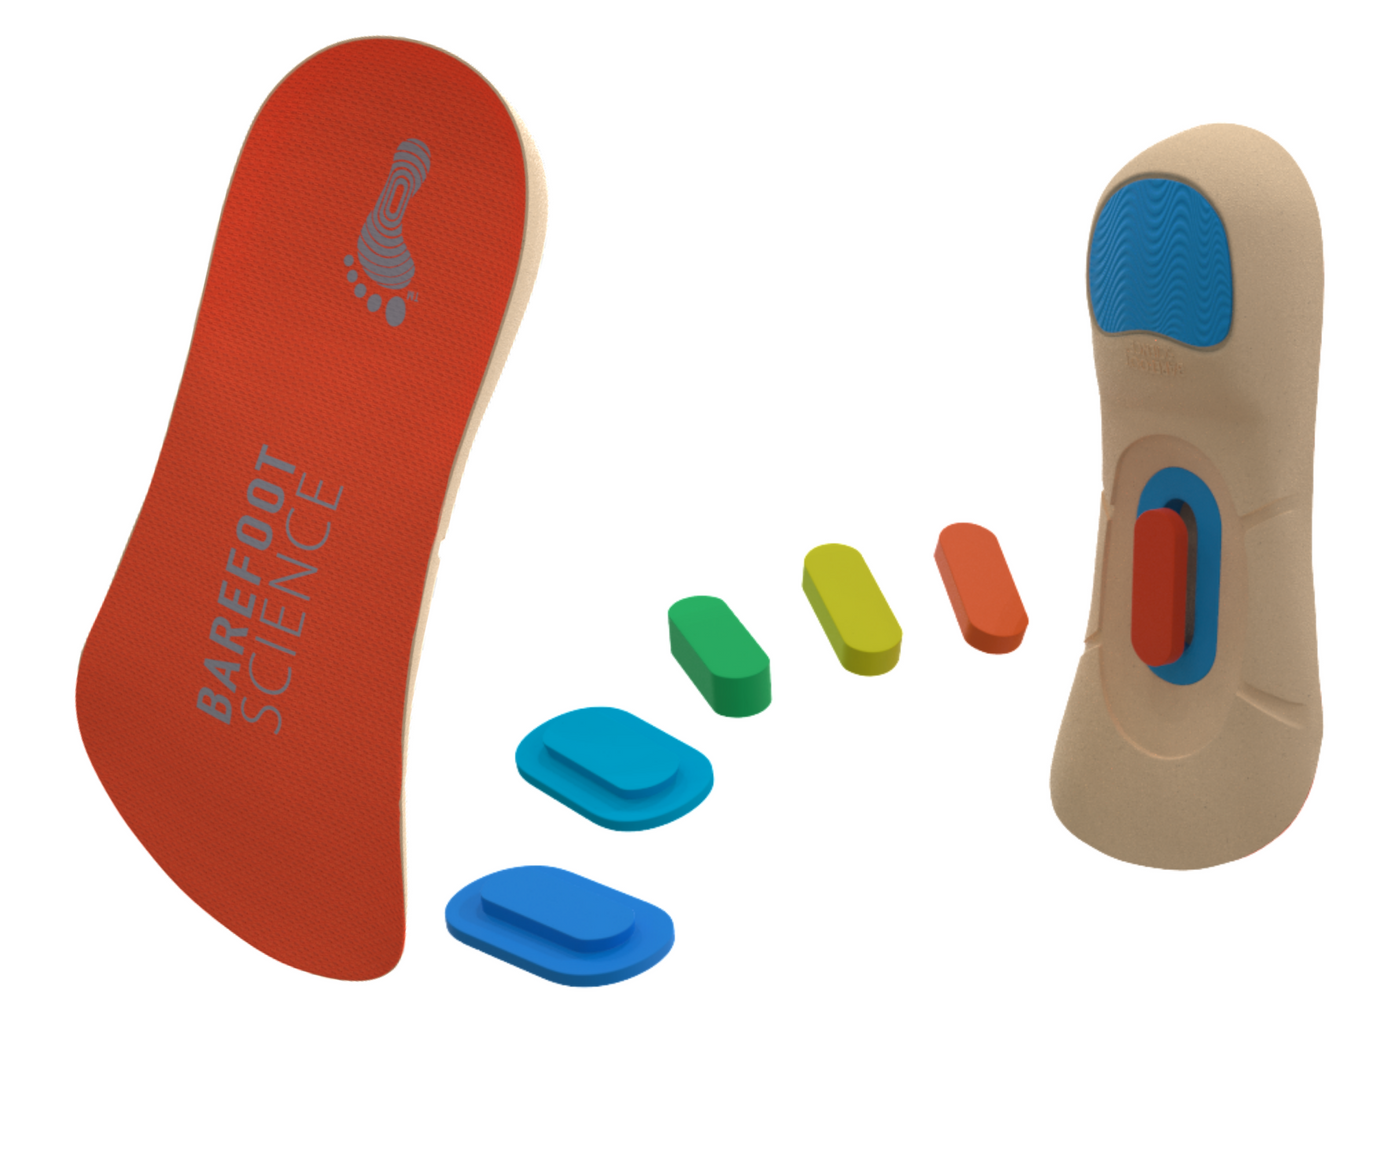 Barefoot Science Active 3/4 Length - top and bottom of insoles with six levels of inserts